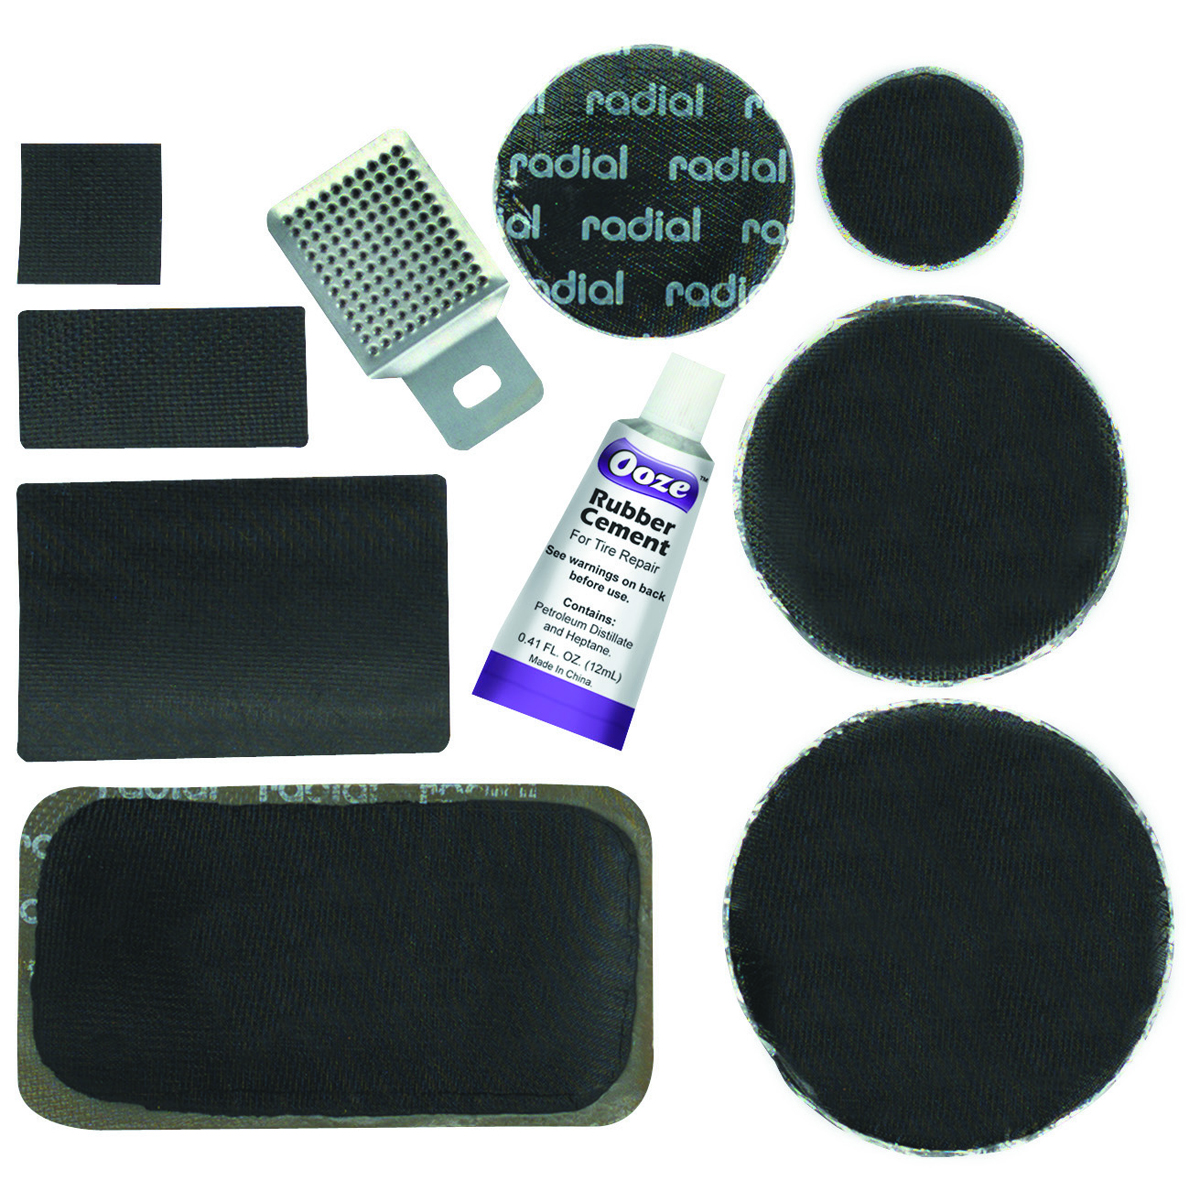 PITTSBURGH AUTOMOTIVE Radial Tire Patch Kit 60 Pc - Item 97215